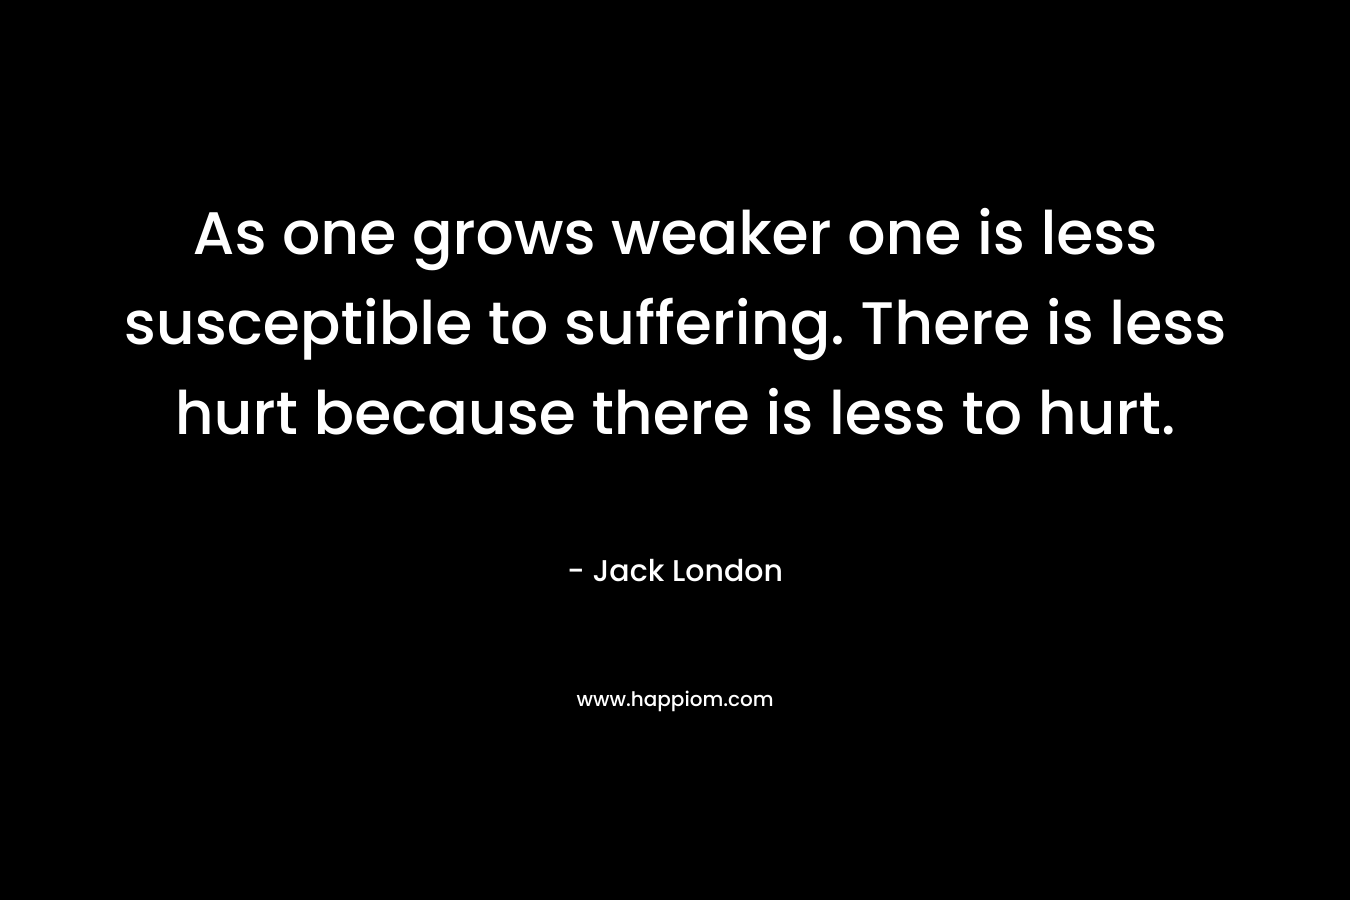 As one grows weaker one is less susceptible to suffering. There is less hurt because there is less to hurt. – Jack London